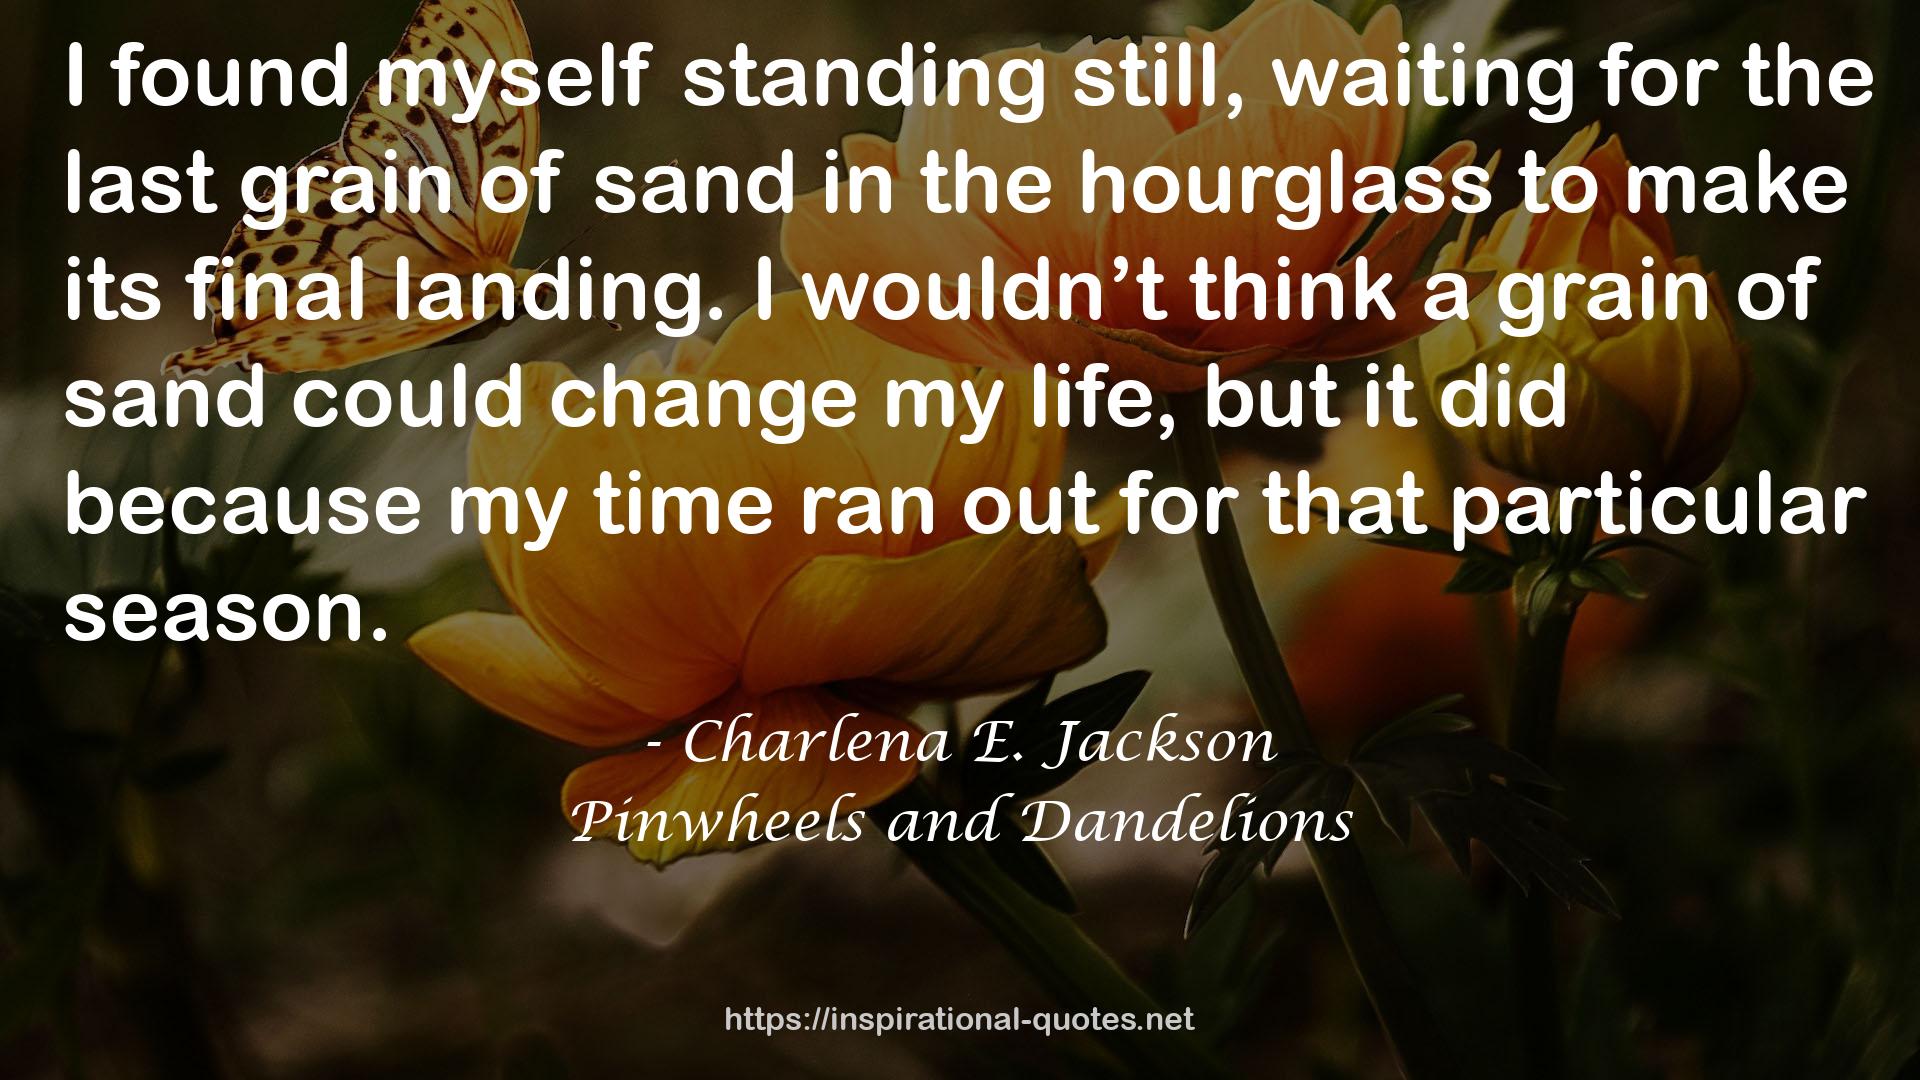 Pinwheels and Dandelions QUOTES